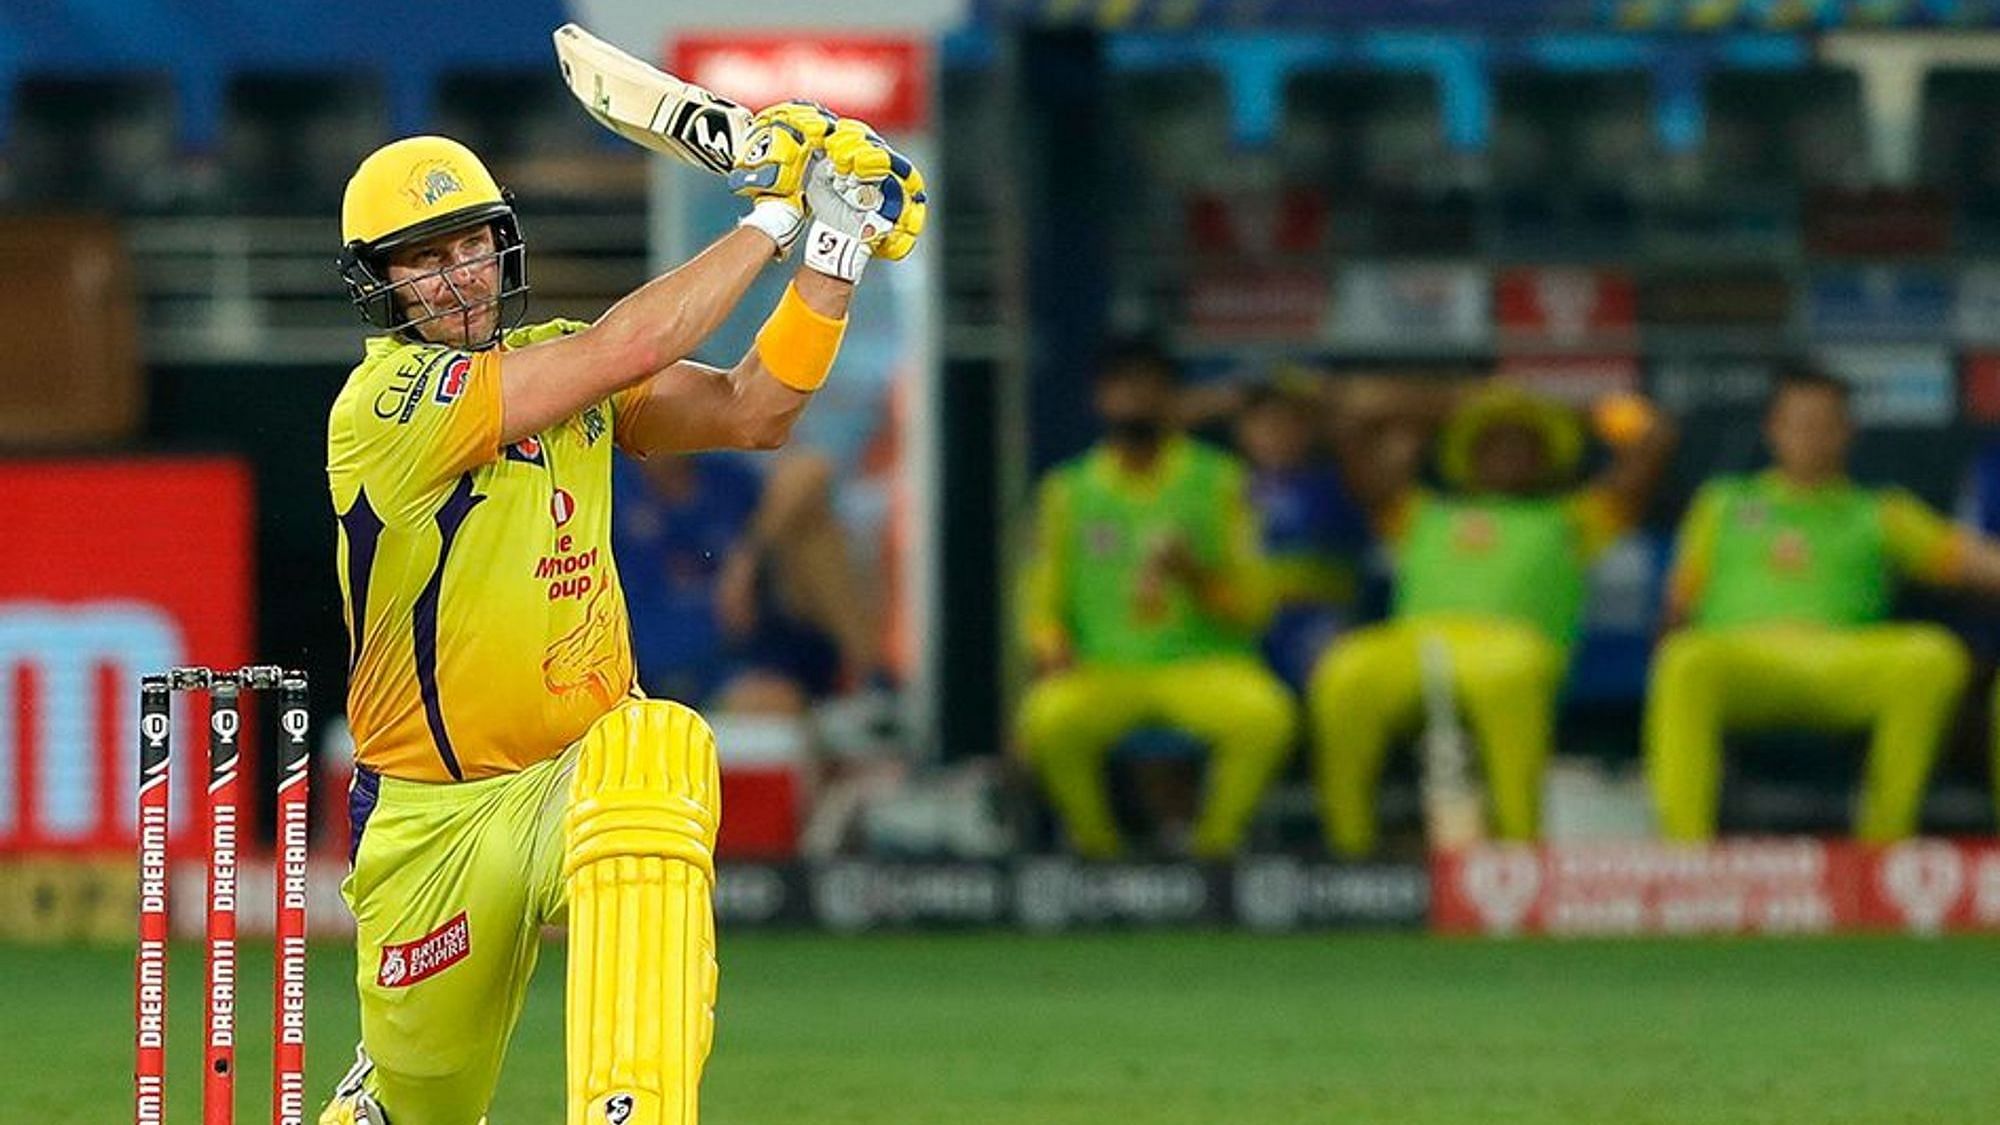 Chennai Super Kings’ opener Shane Watson smashed 83* runs off 53 balls after a string of low scores